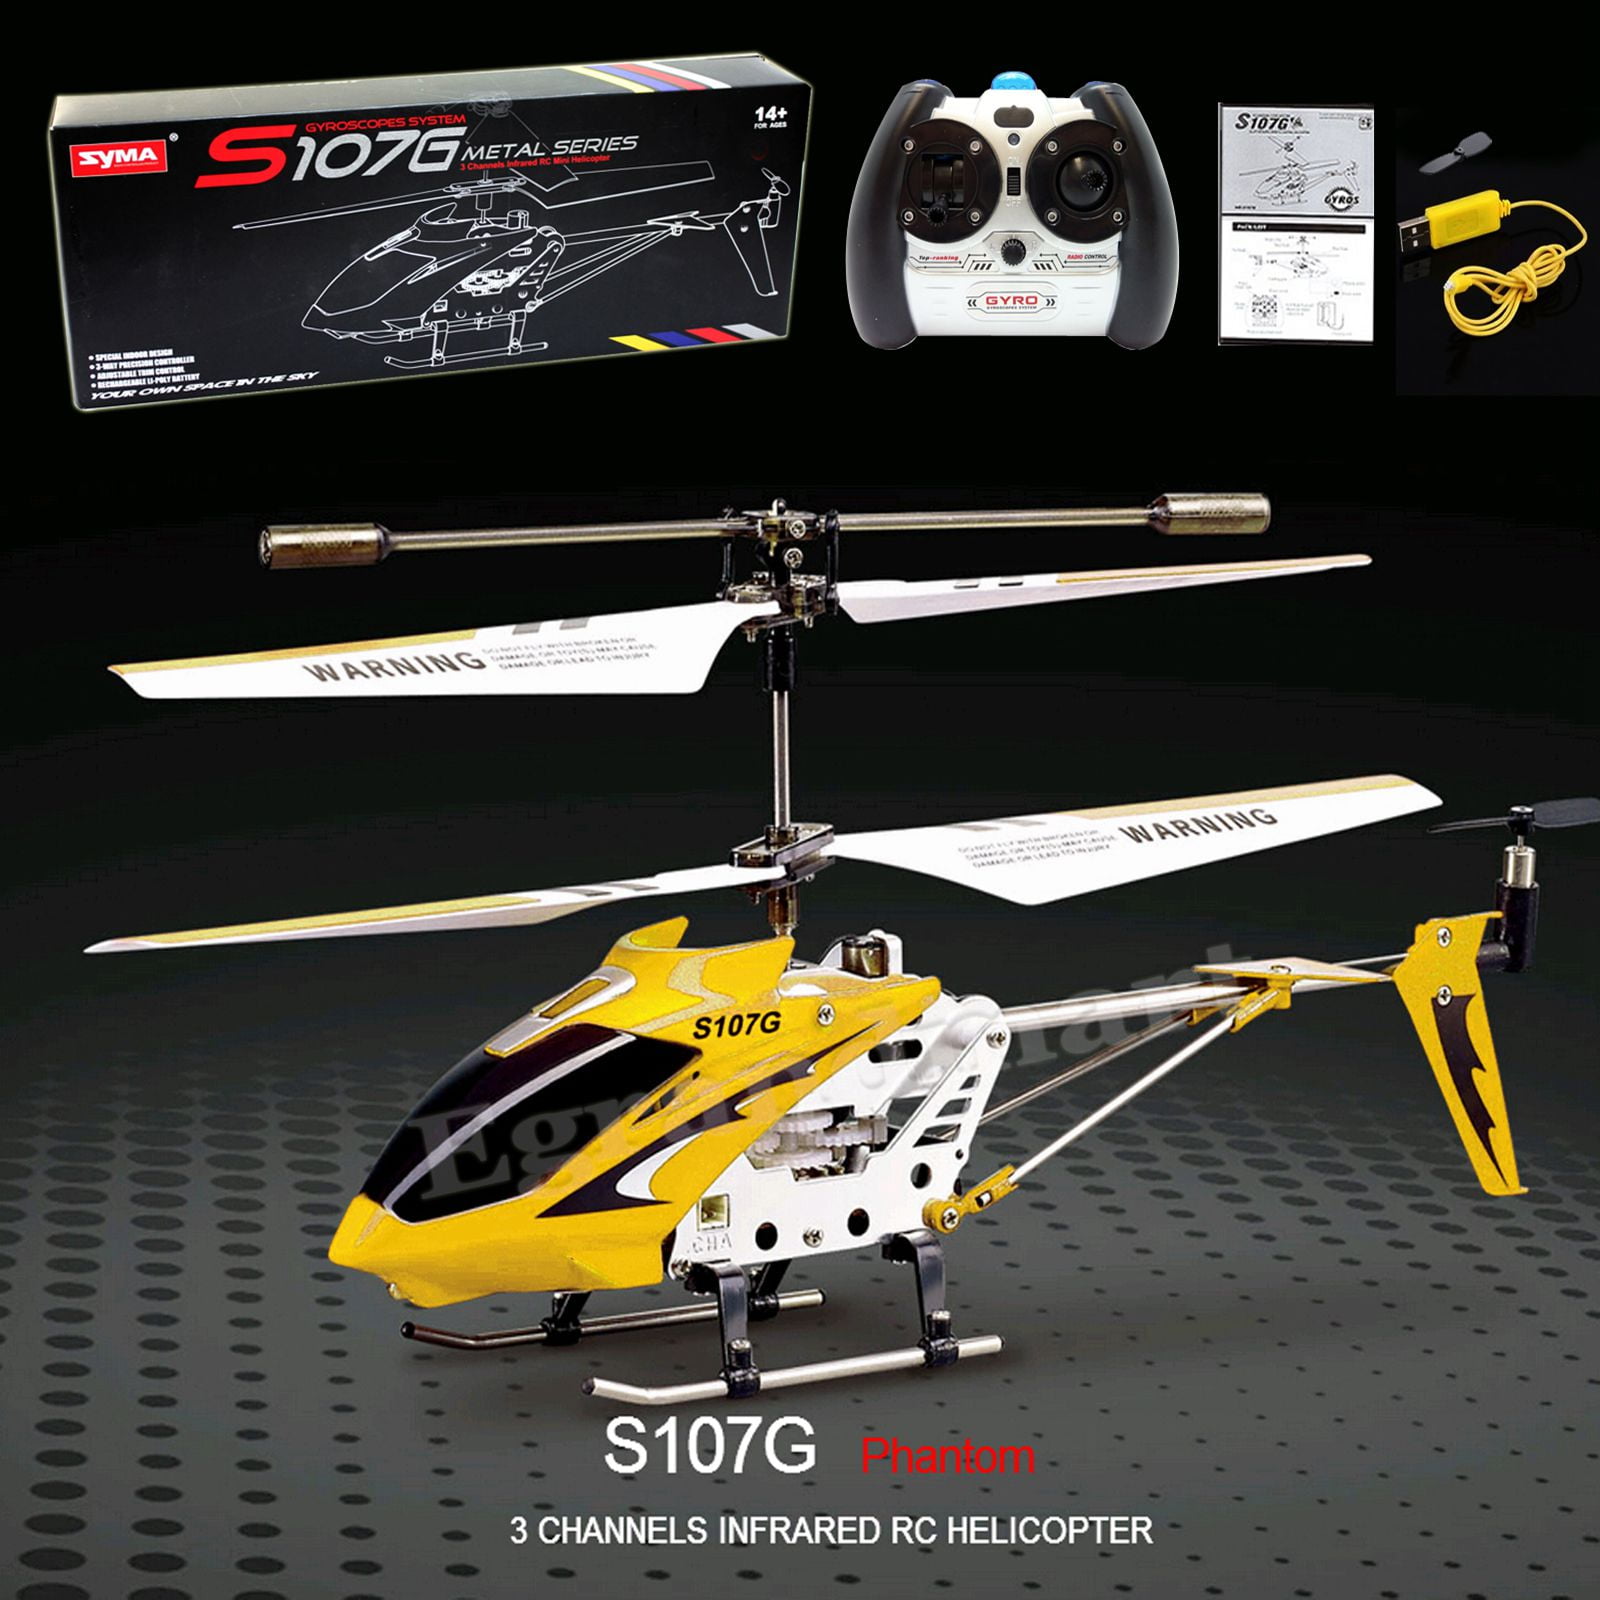 Syma S107G 3.5CH RC Helicopter Phantom Metal Mini Remote Control Helicopter GYRO 